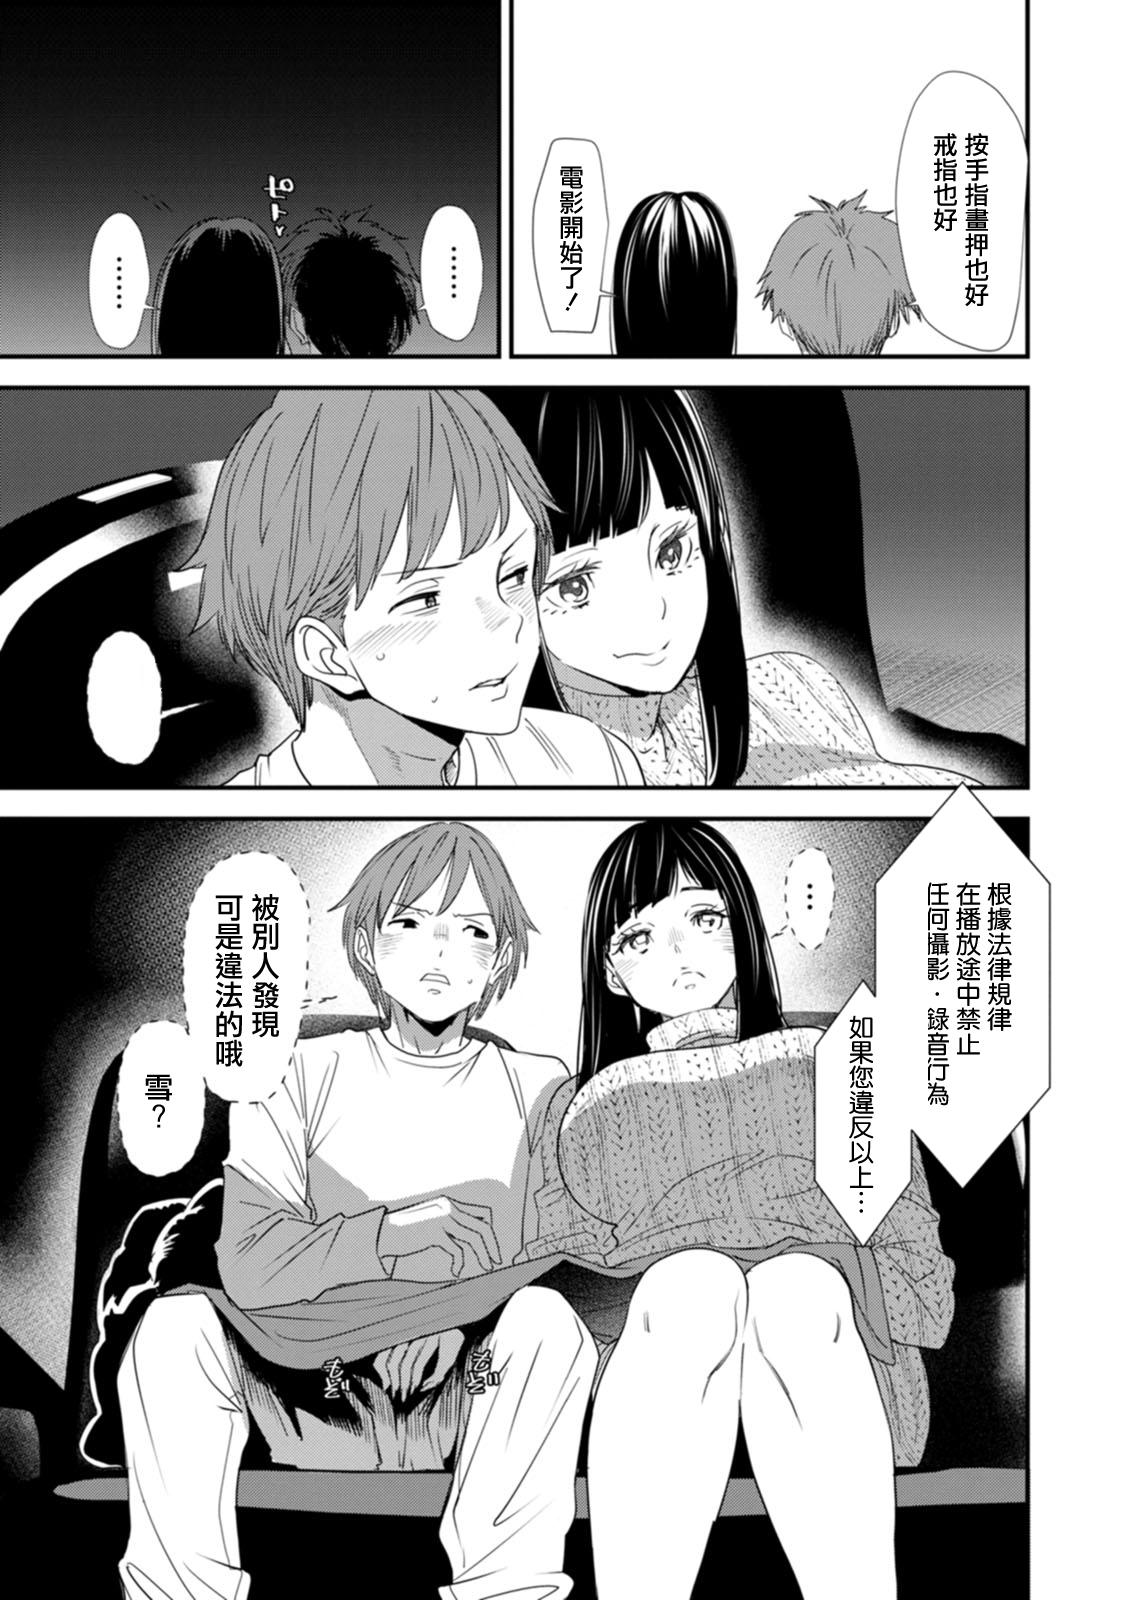 Interracial Inma Joshi Daisei no Yuuutsu - The Melancholy of the Succubus who is a college student Ch. 5 Big Booty - Page 7